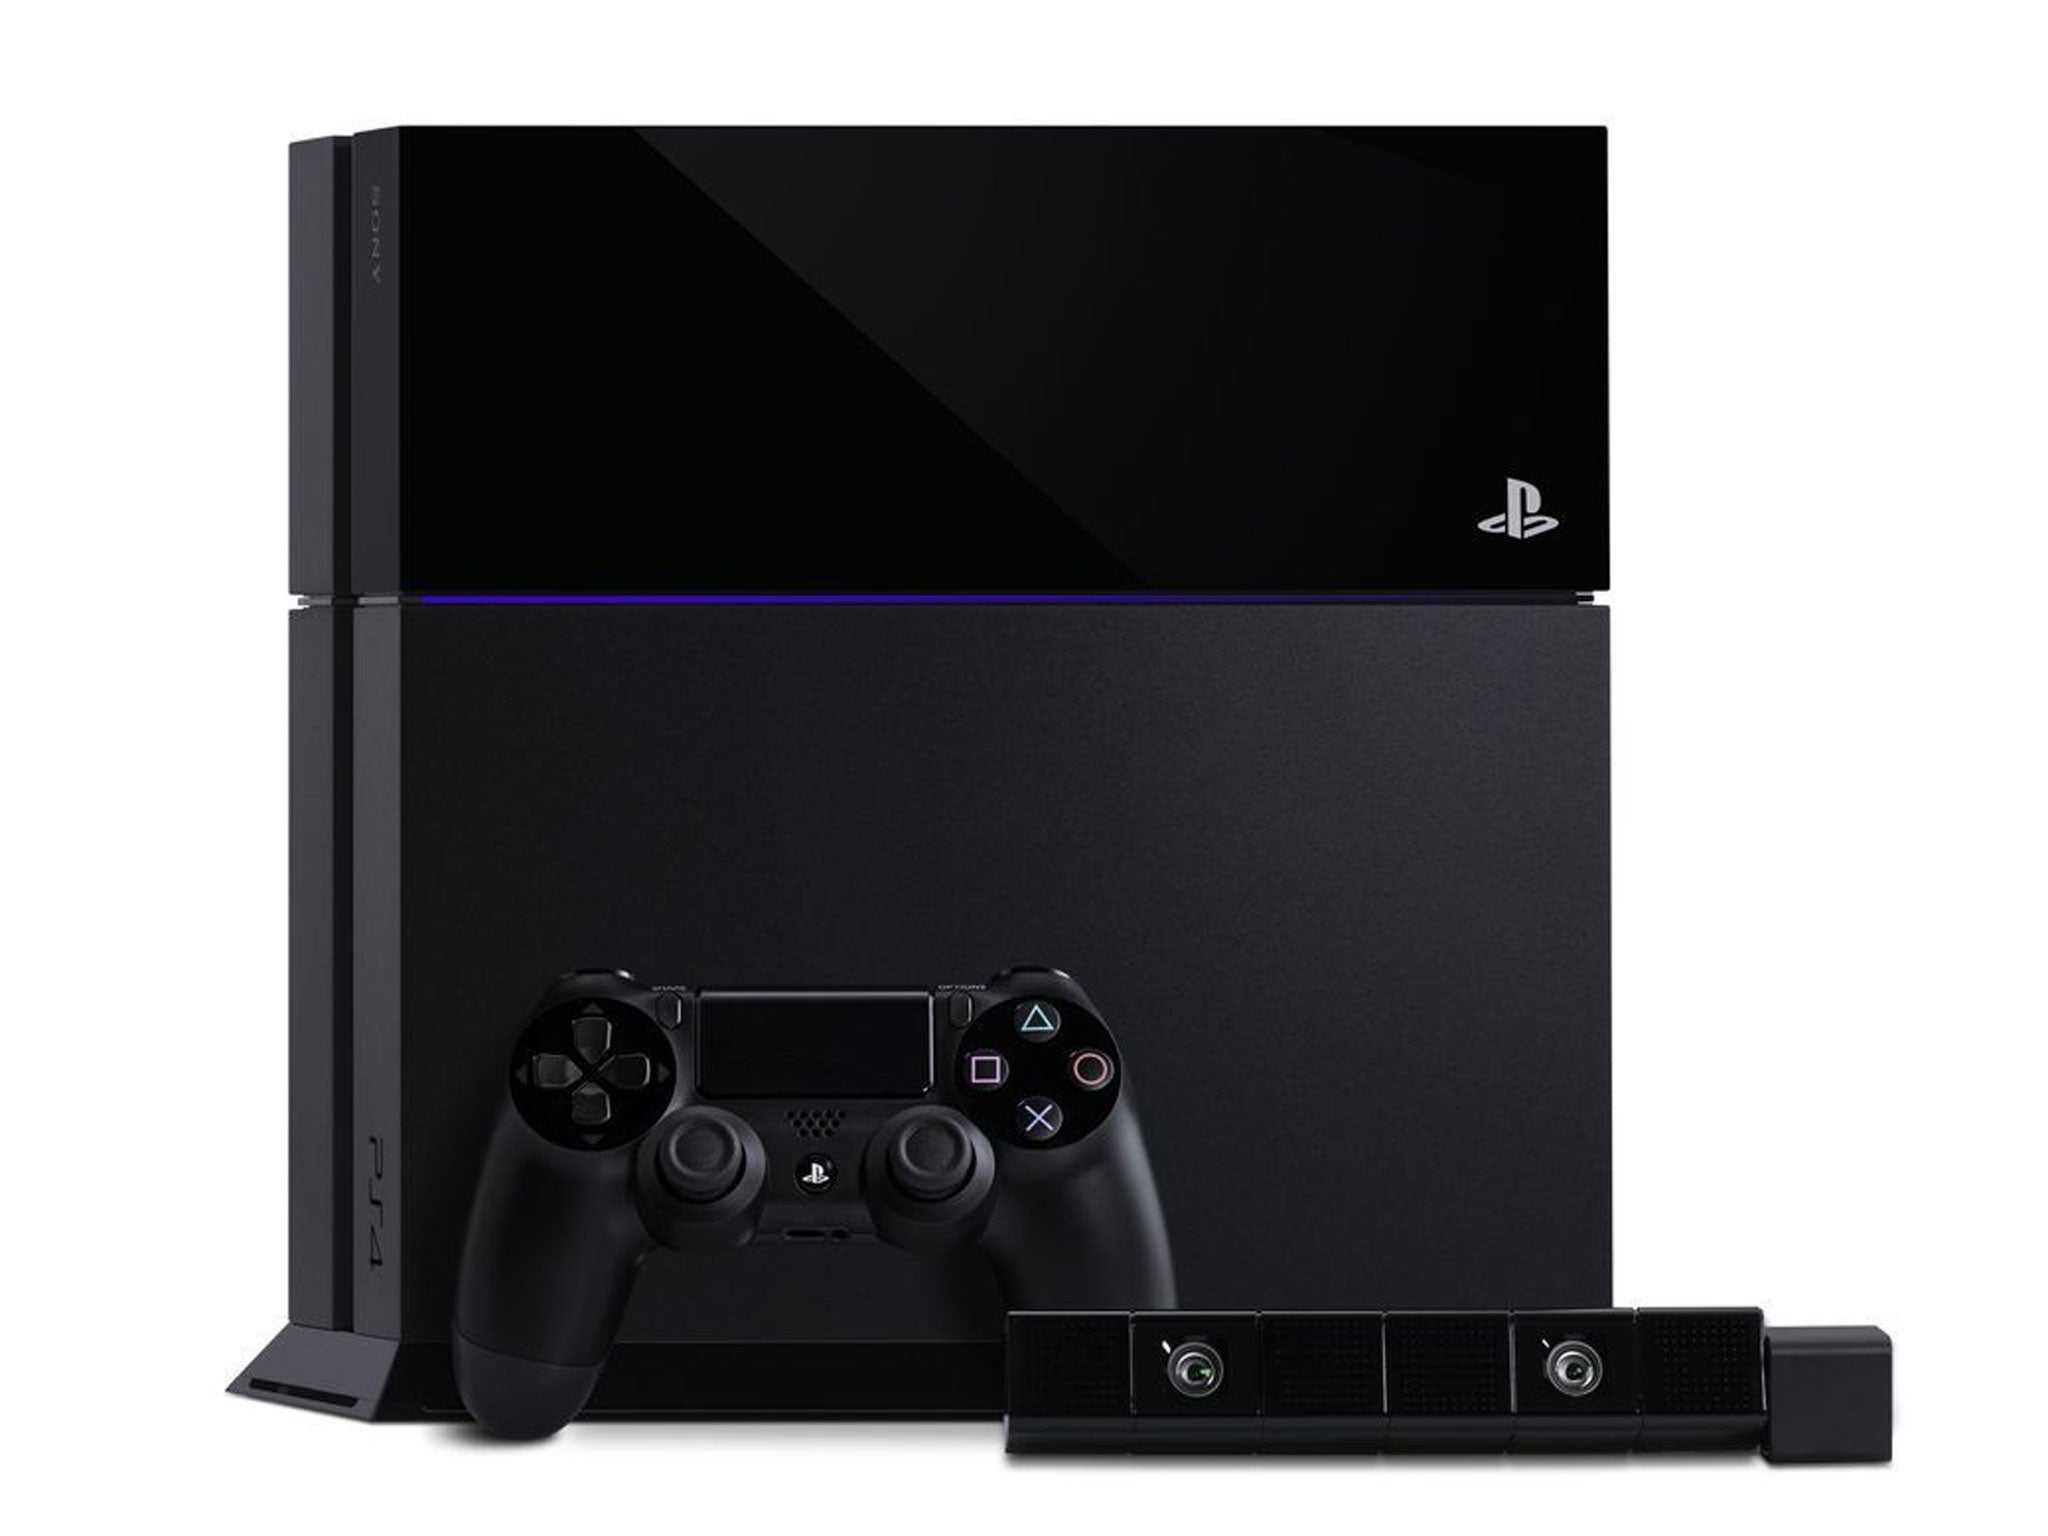 The PS4 goes on sale tonight in the UK for £349.